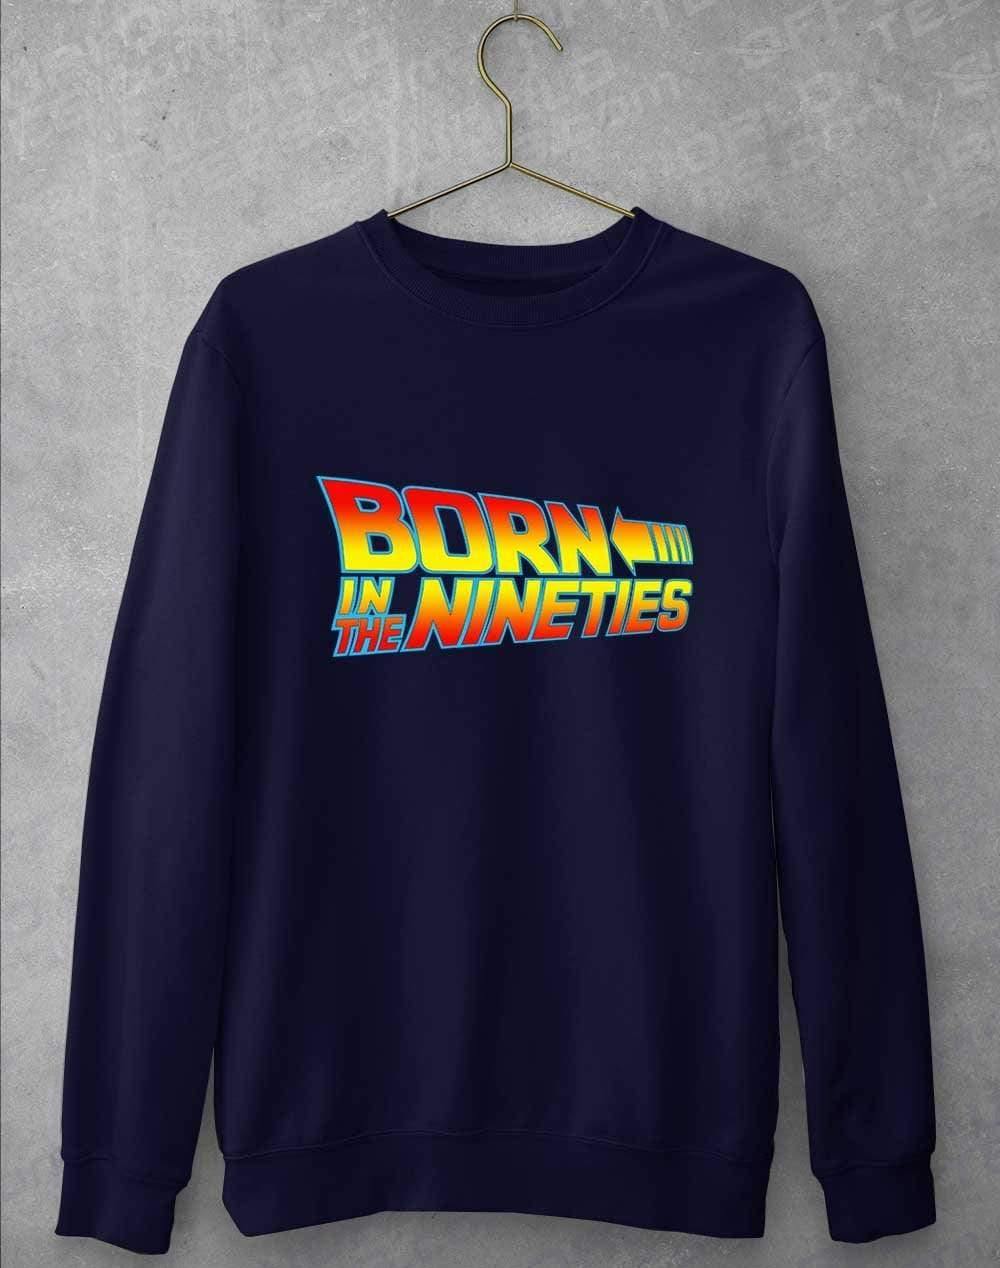 Born in the... (CHOOSE YOUR DECADE!) Sweatshirt 1990s - Navy / S  - Off World Tees